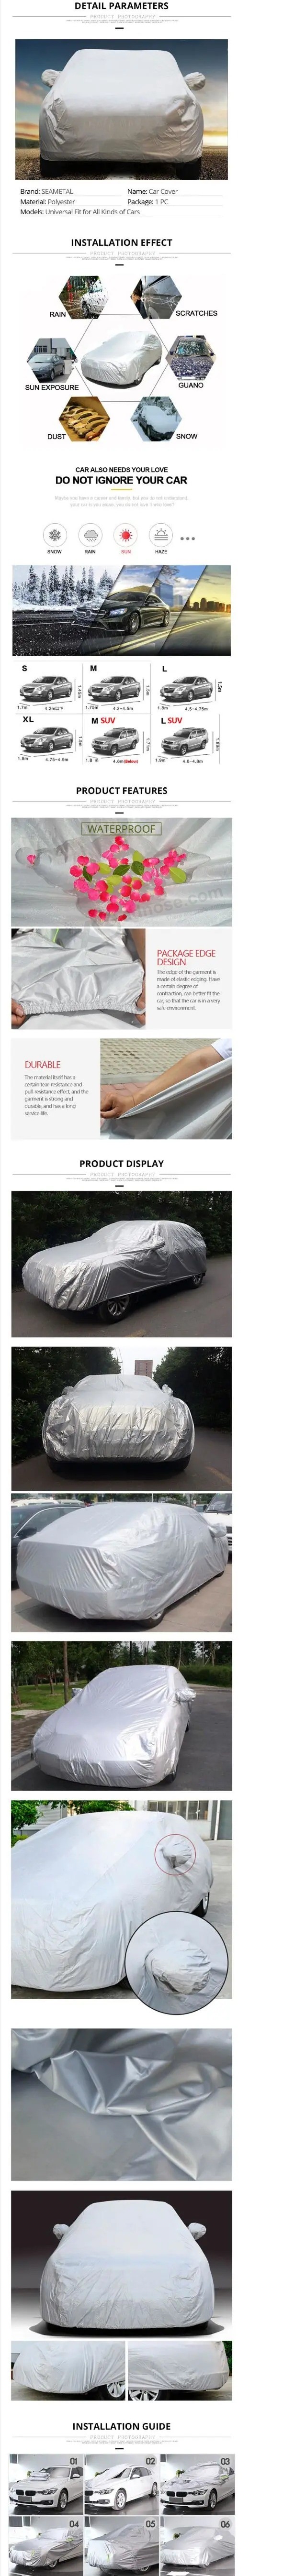 Exterior Car cover Outdoor protection Full Car covers Snow cover Sunshade waterproof Dustproof universal for hatchback Sedan SUV